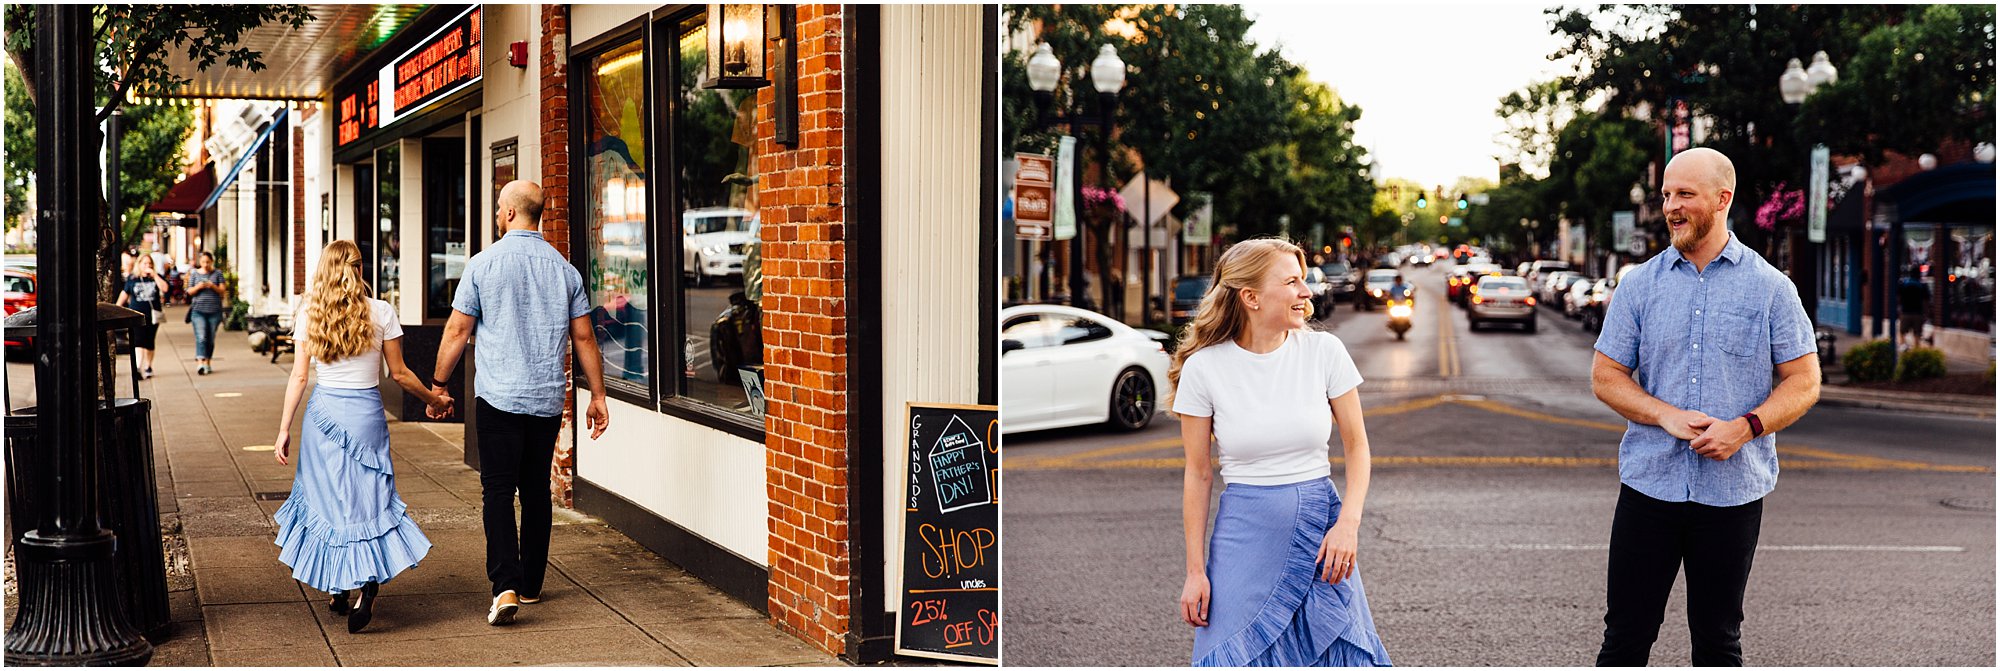 Engaged couple enjoying their evening together in downtown Franklin, TN 